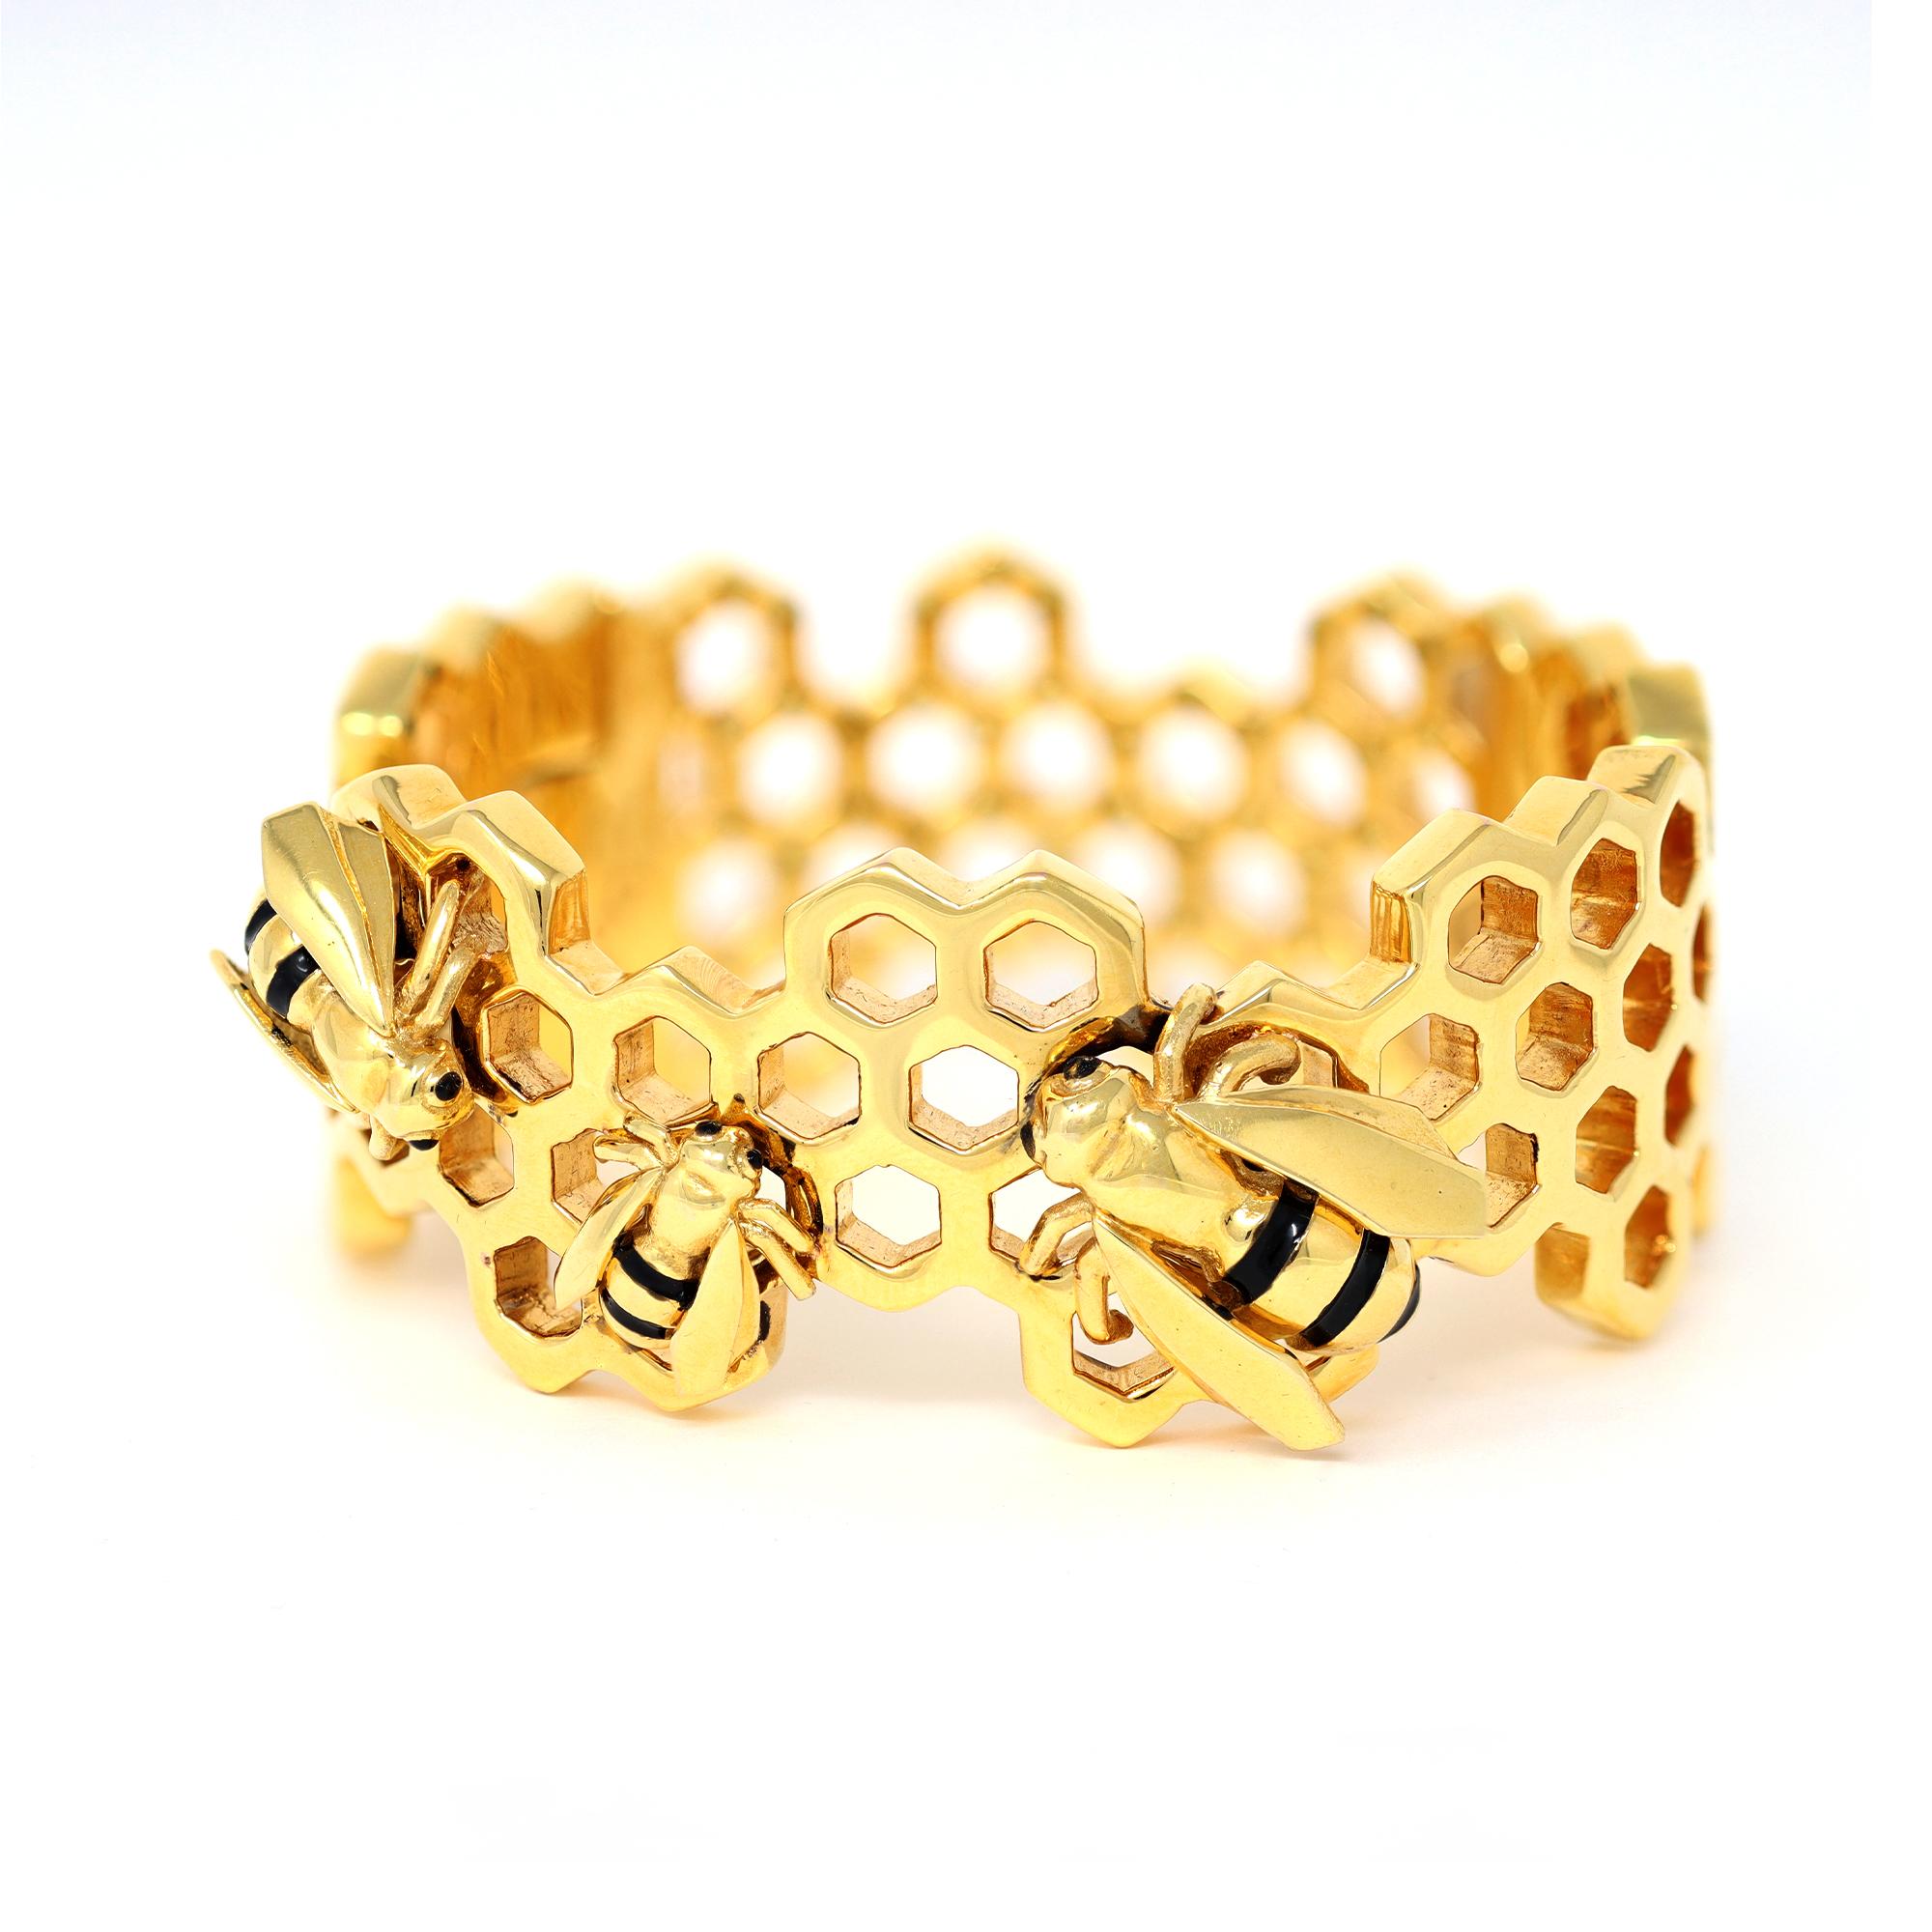 The hinged bangle is designed by Giordana Castellan, originated in Italy. The bracelet is made in 14 karat yellow gold and is accented by 3 black enemeled bees. The gross weight is 41.1 grams, length 6¾ inches, width 1⅛ inches, stamped Giordana